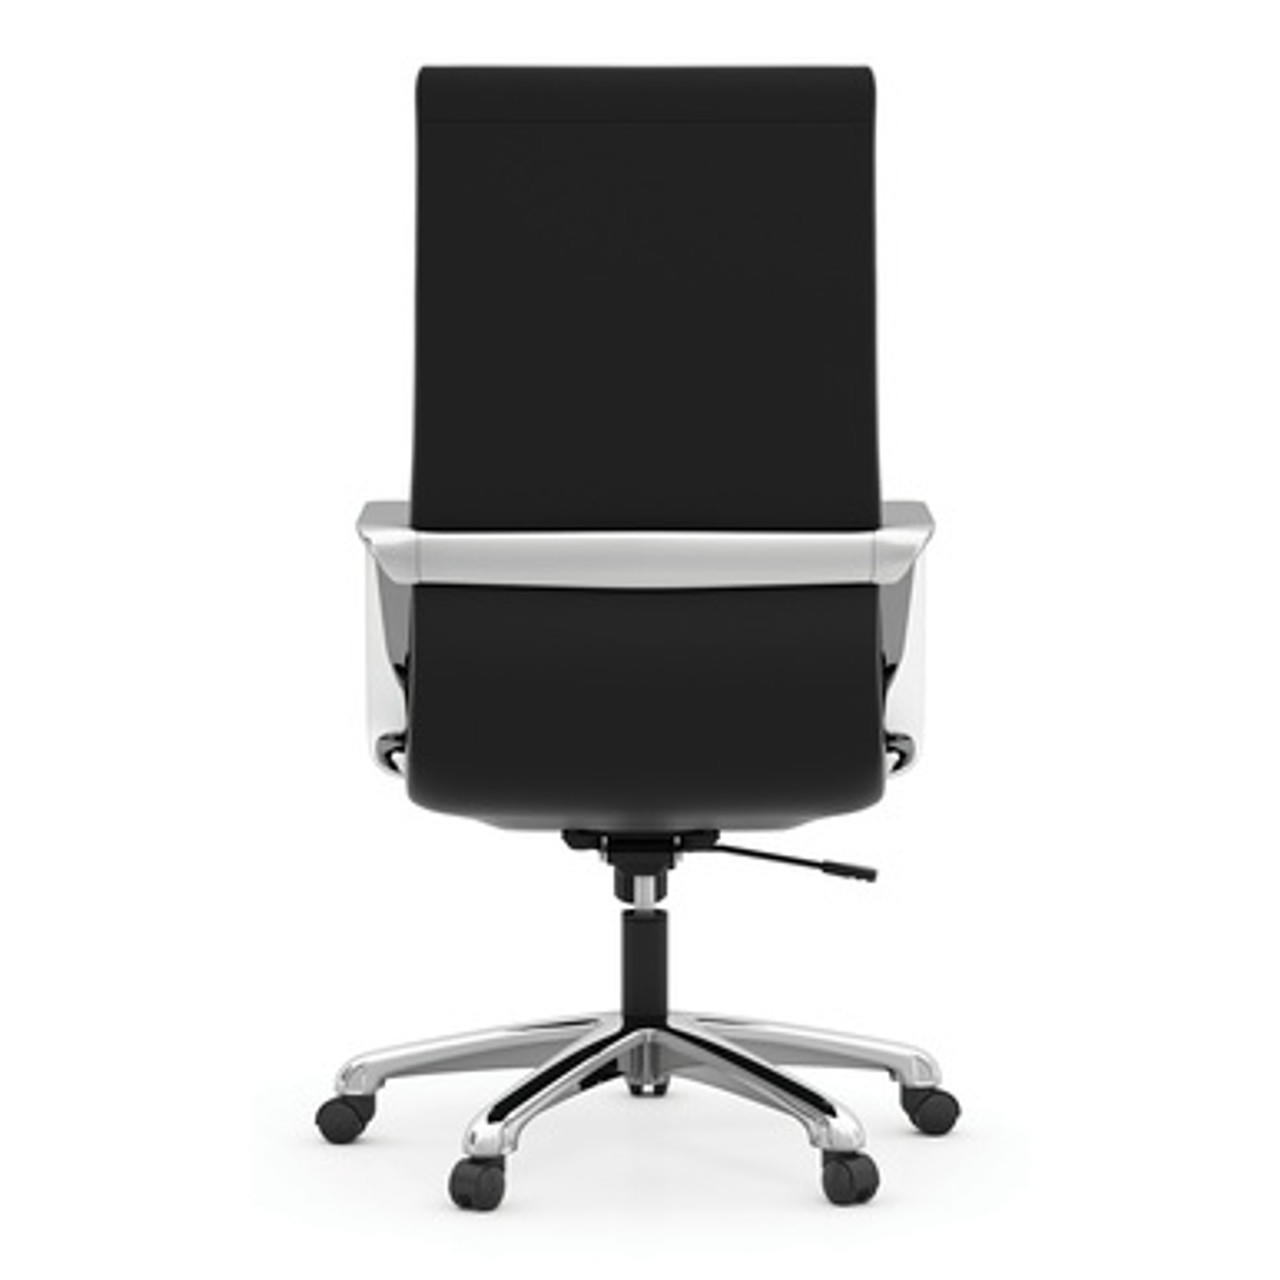  Office Source Tre Lite High Back Ribbed Chair 60811A 